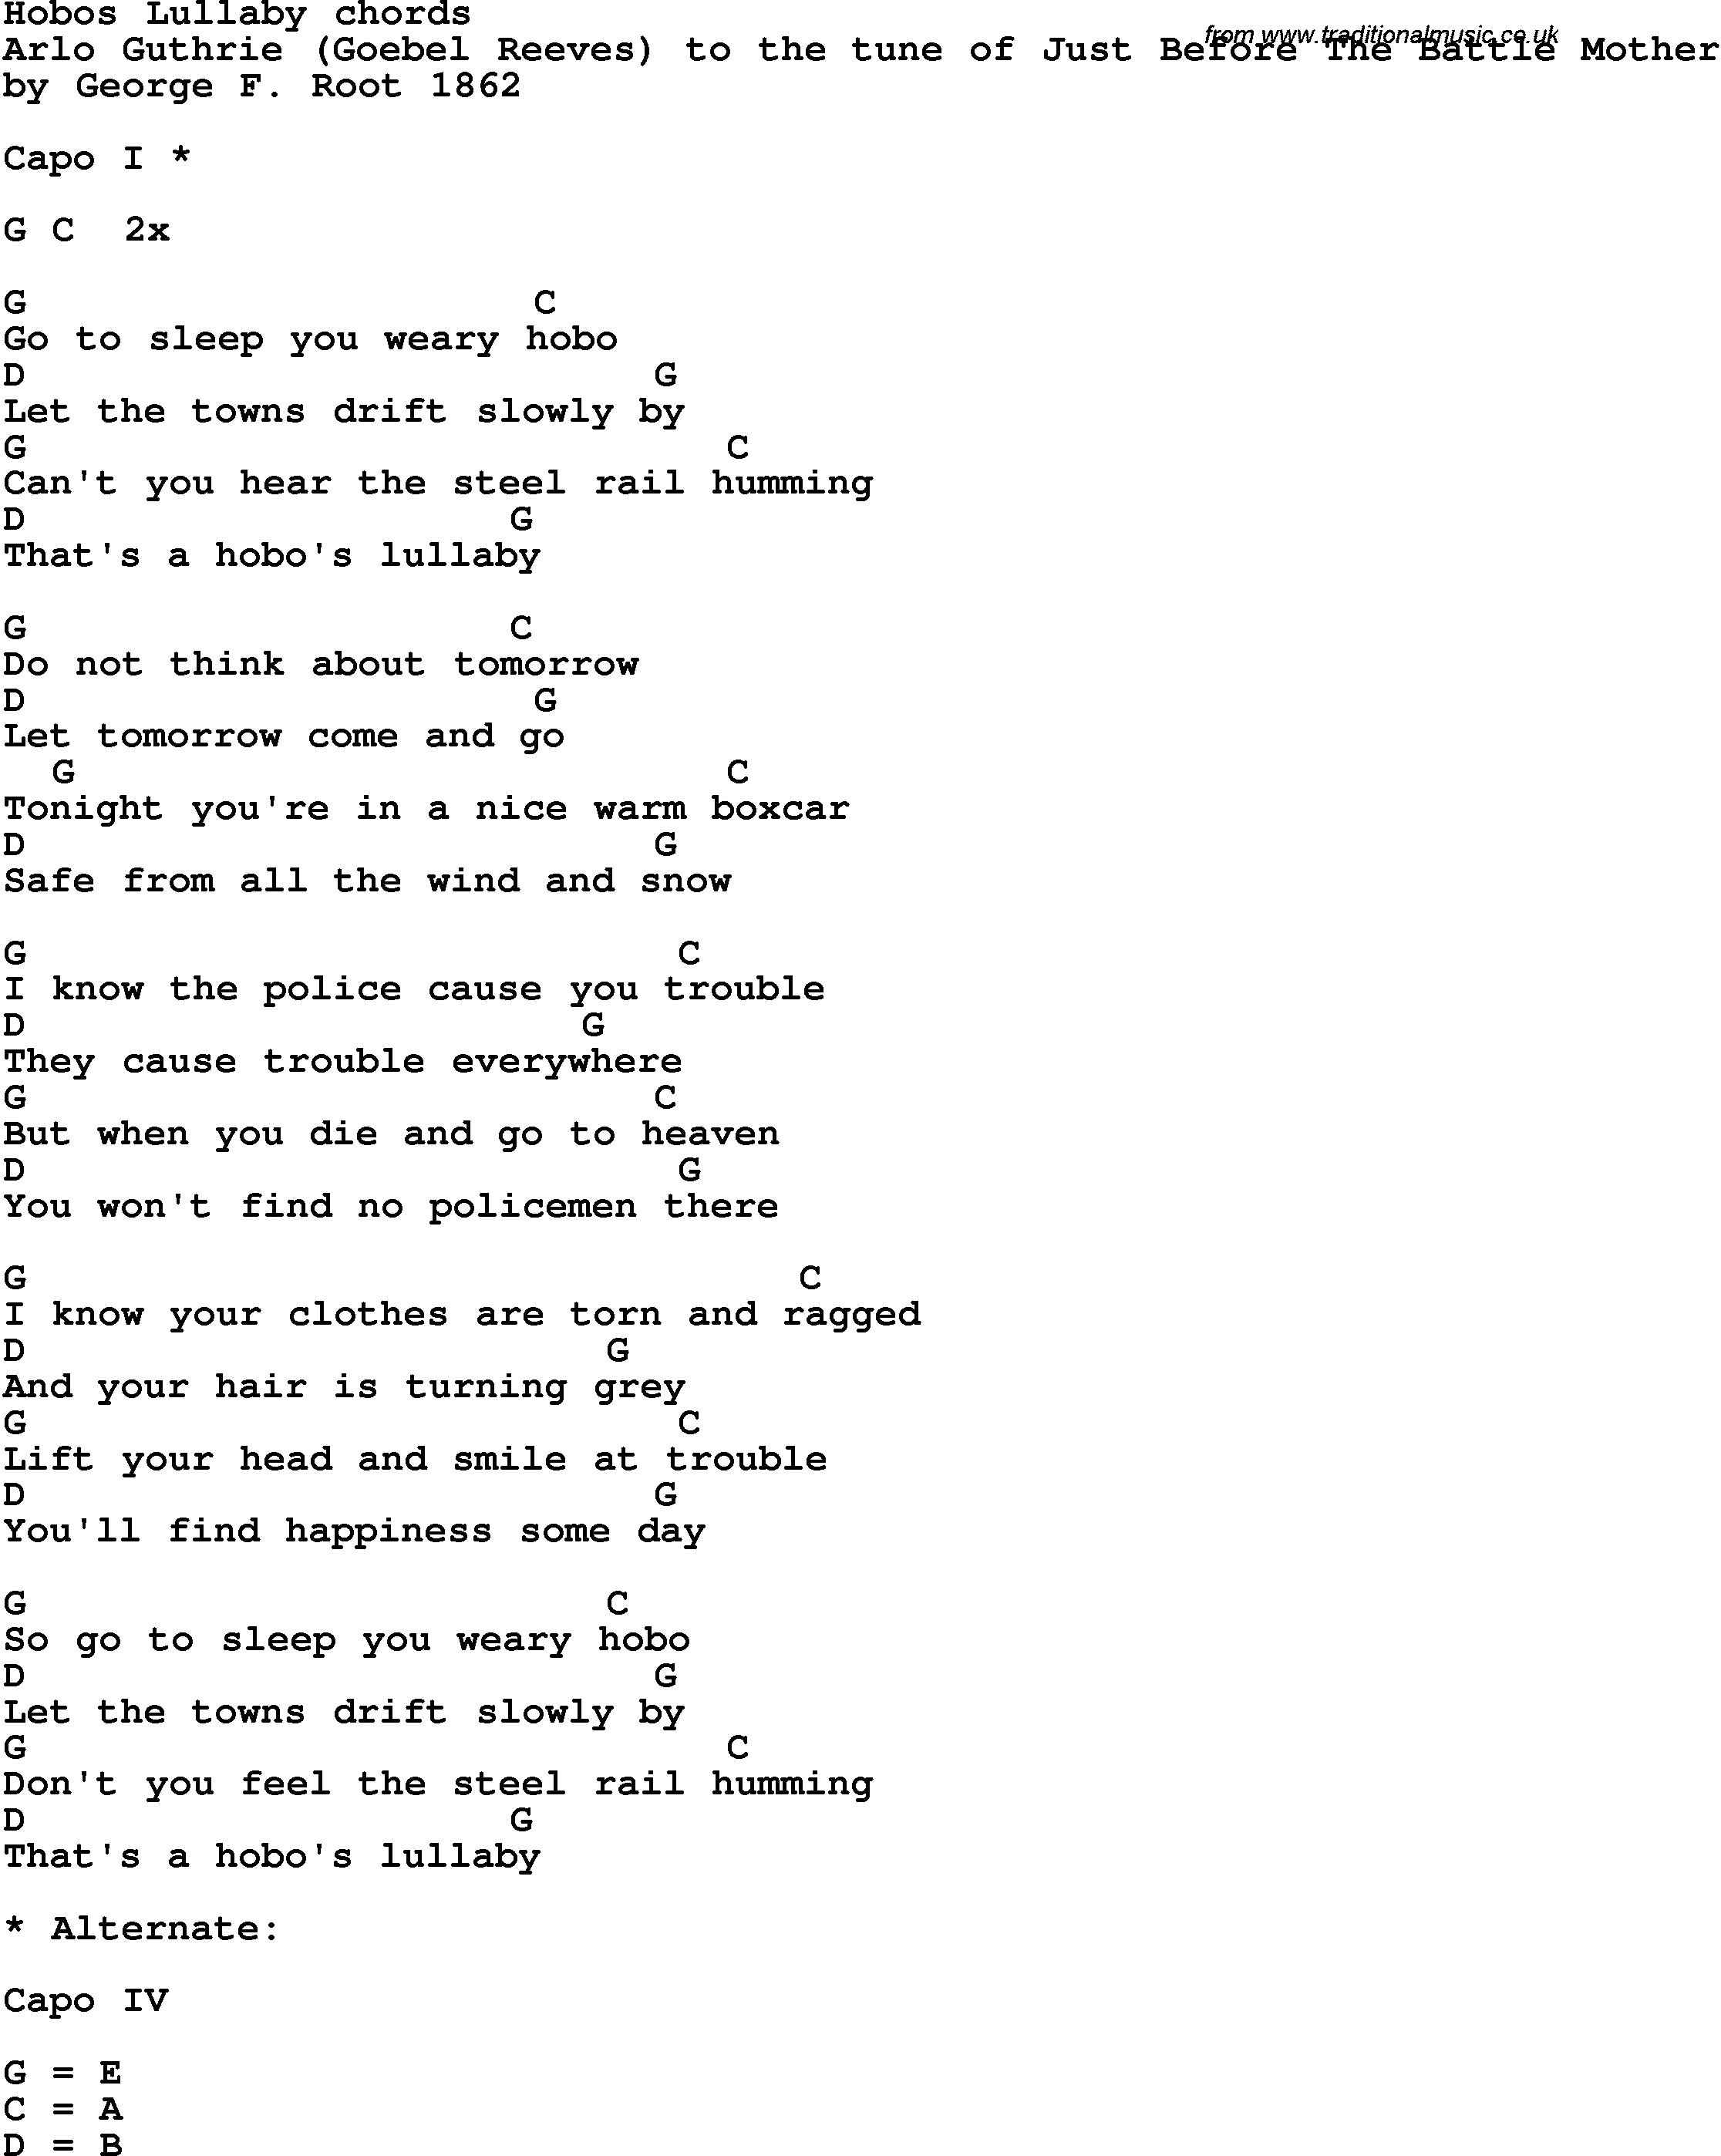 Song Lyrics with guitar chords for Hobo's Lullaby